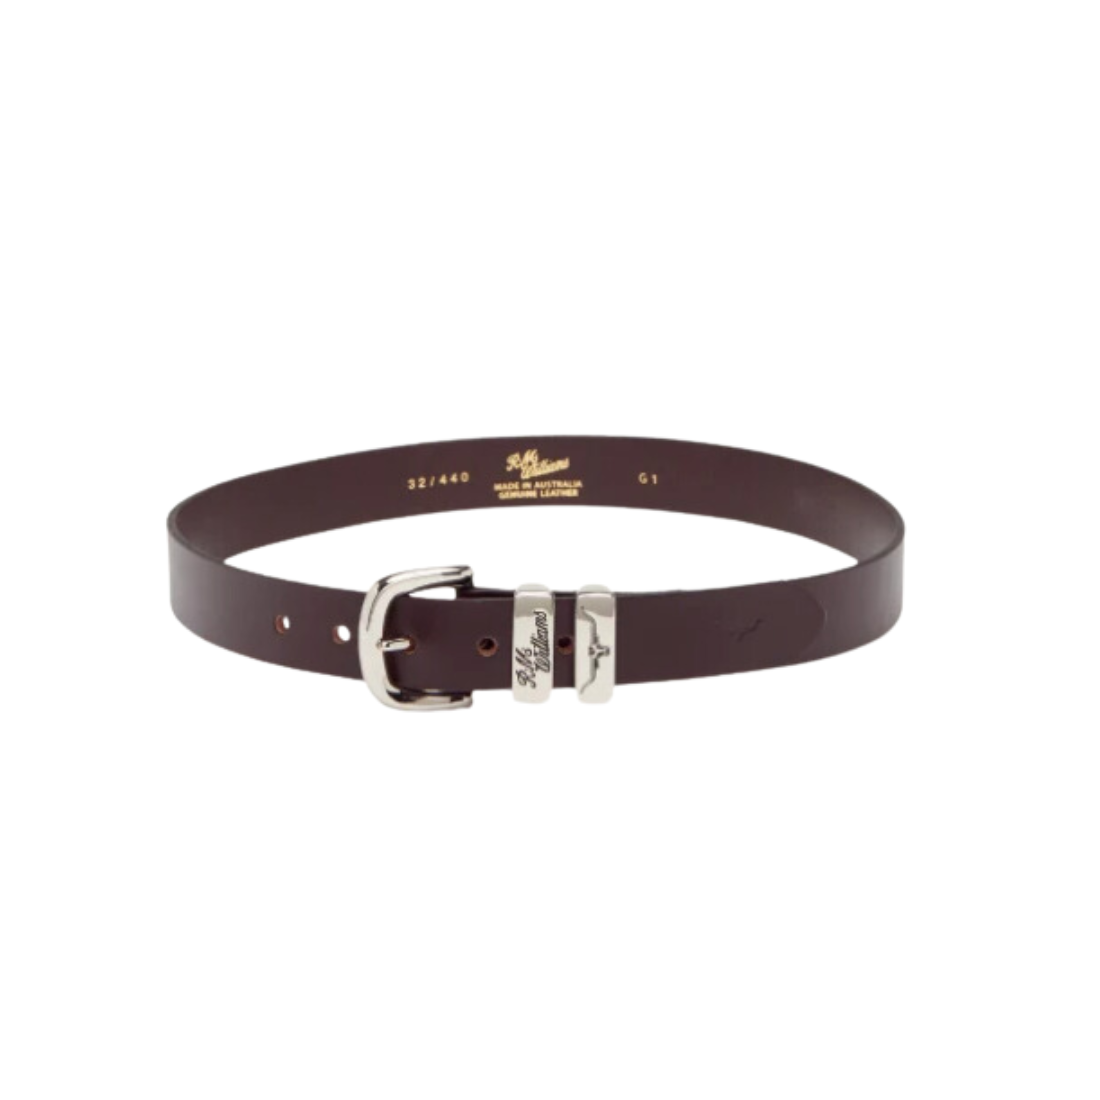 RM Williams 1 1/4 inch Solid Hide Belt